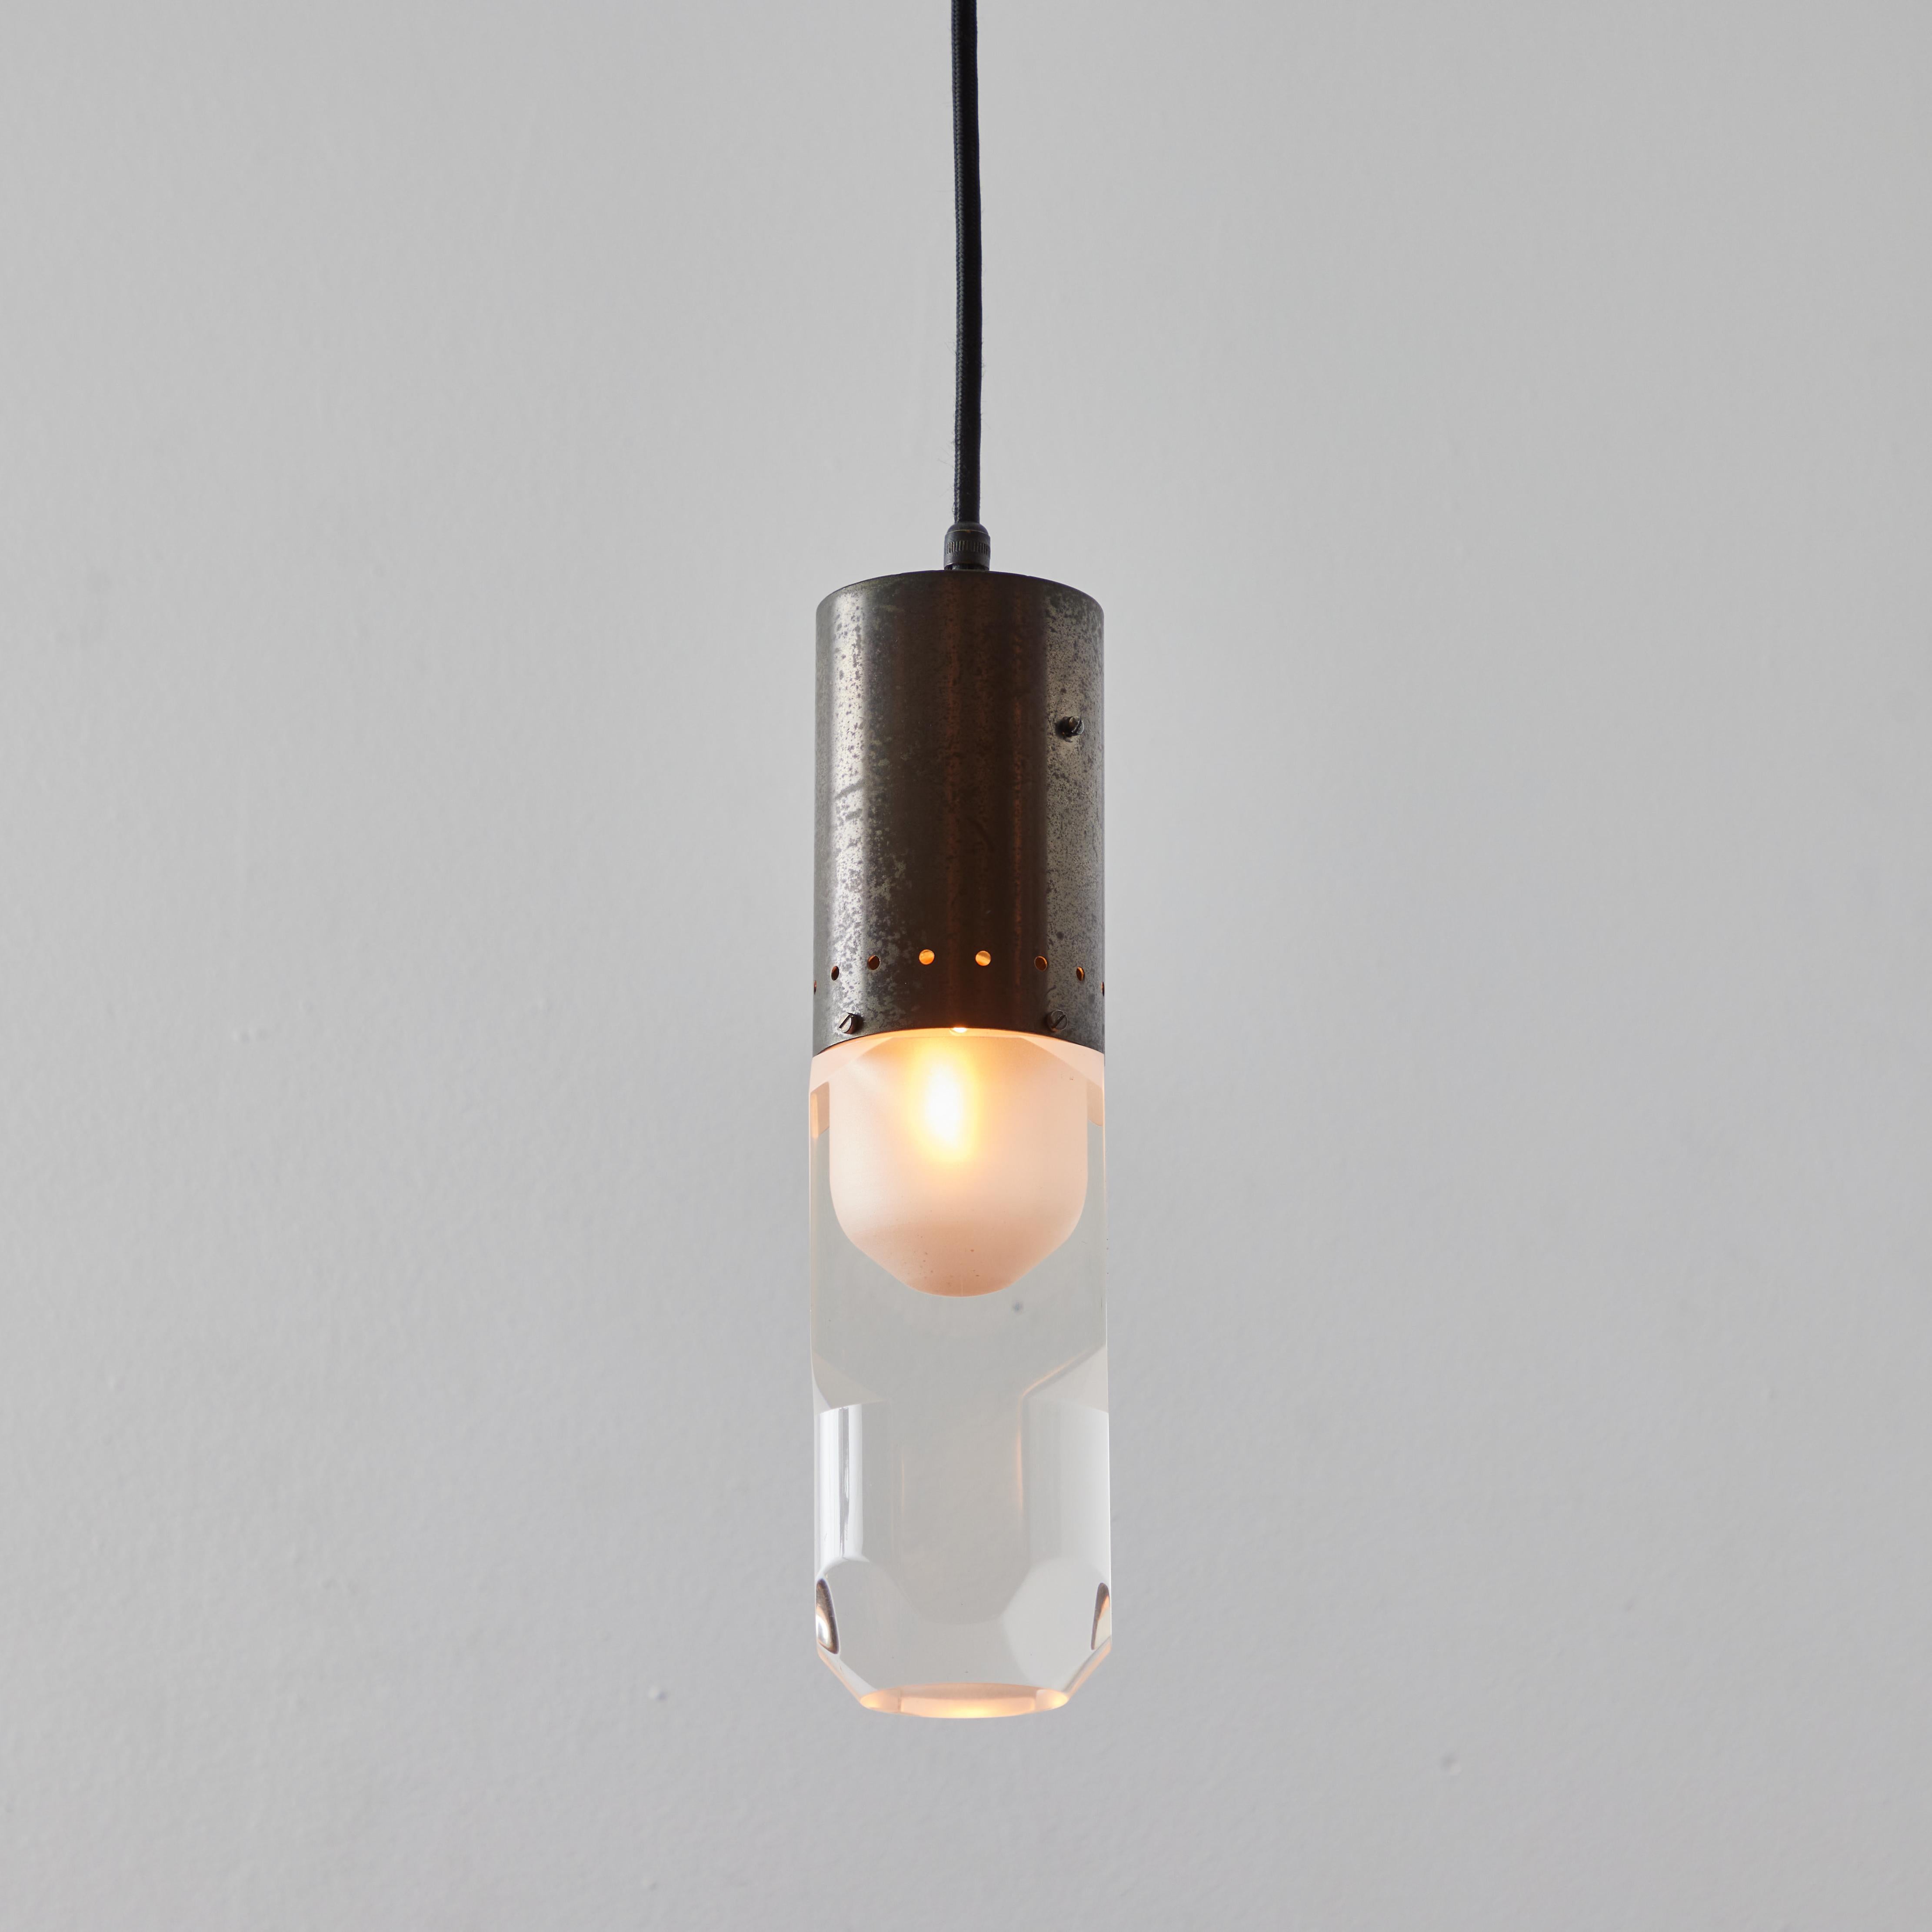 Mid-Century Modern 1960s Faceted Diffuser Pendant Lamp Attributed to Stilnovo For Sale